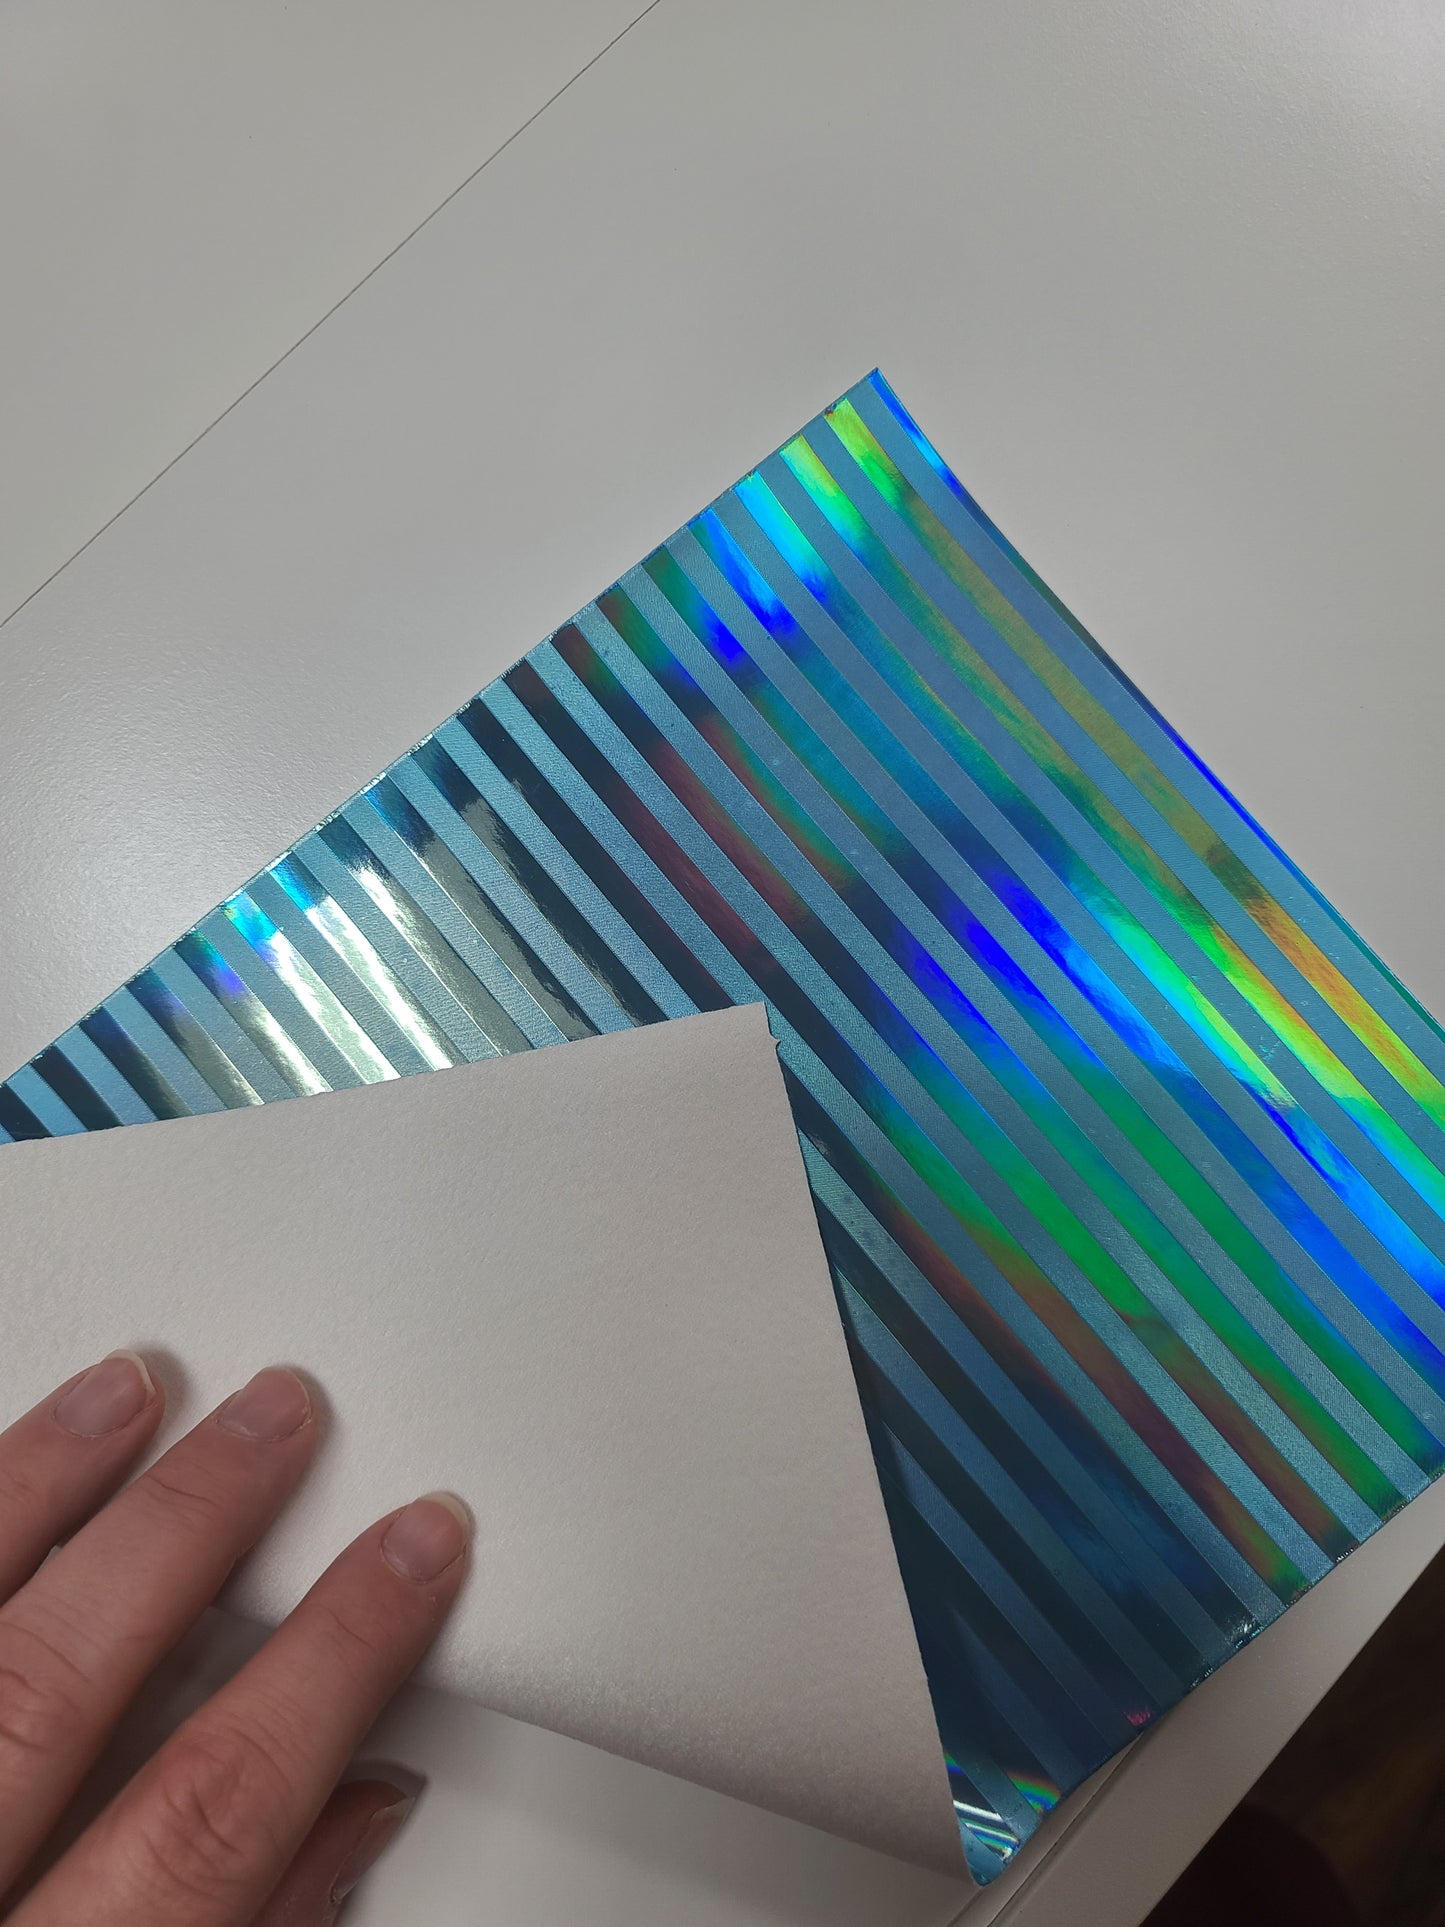 Reflective Striped Fabric Sheets